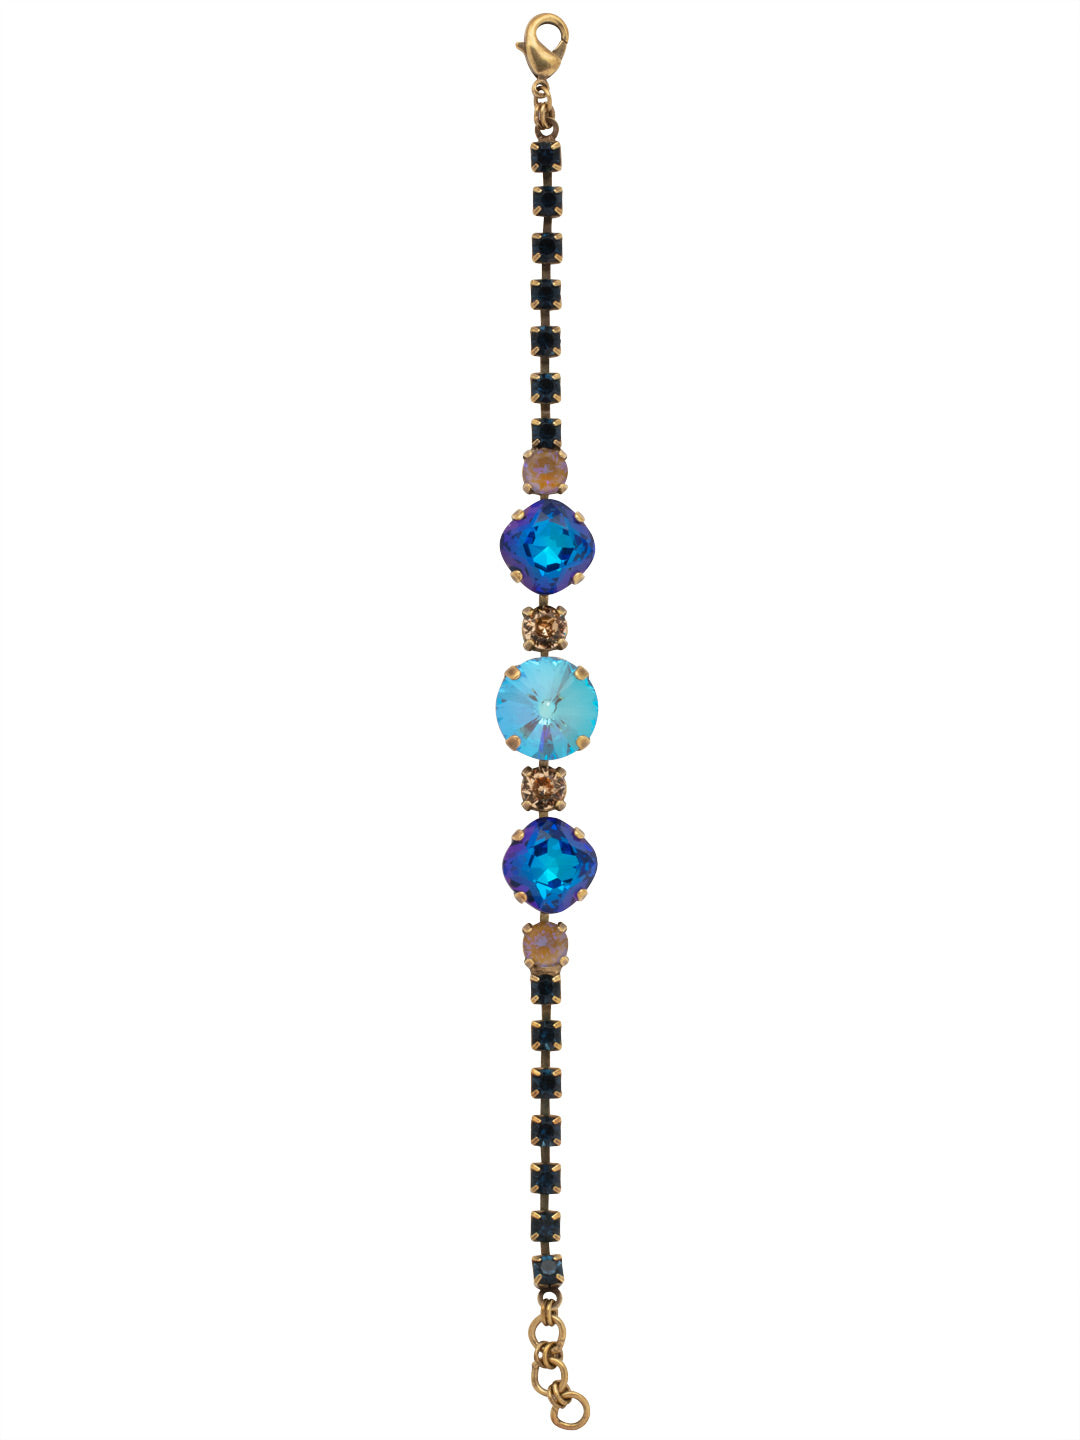 Half Circle Tennis Bracelet - BEY52AGVBN - <p>The Half Circle Tennis Bracelet adds the perfect amount of sparkle to every outfit. A crystal embellished chain connects varying sizes and colors of crystals with a lobster clasp closure. From Sorrelli's Venice Blue collection in our Antique Gold-tone finish.</p>